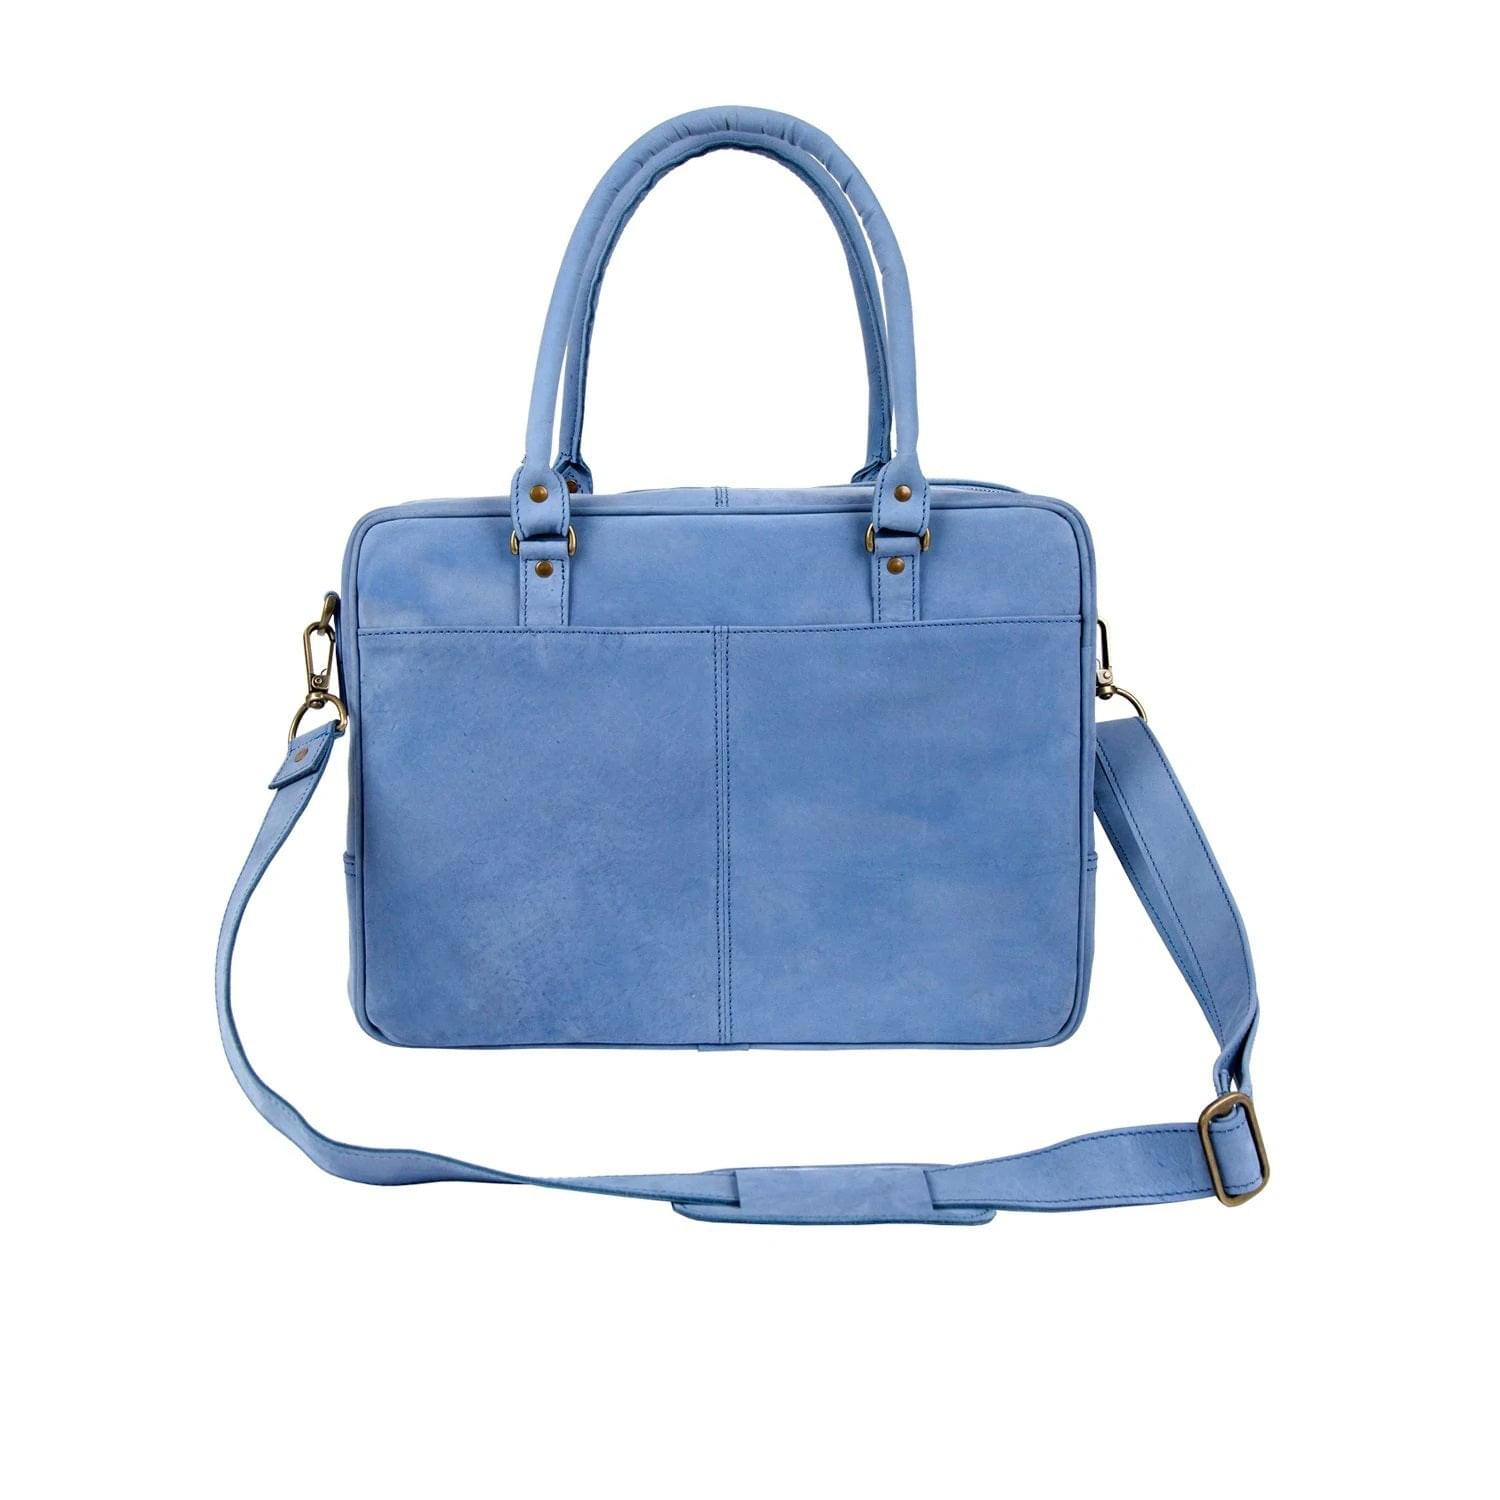 Blue Suede Leather Bag